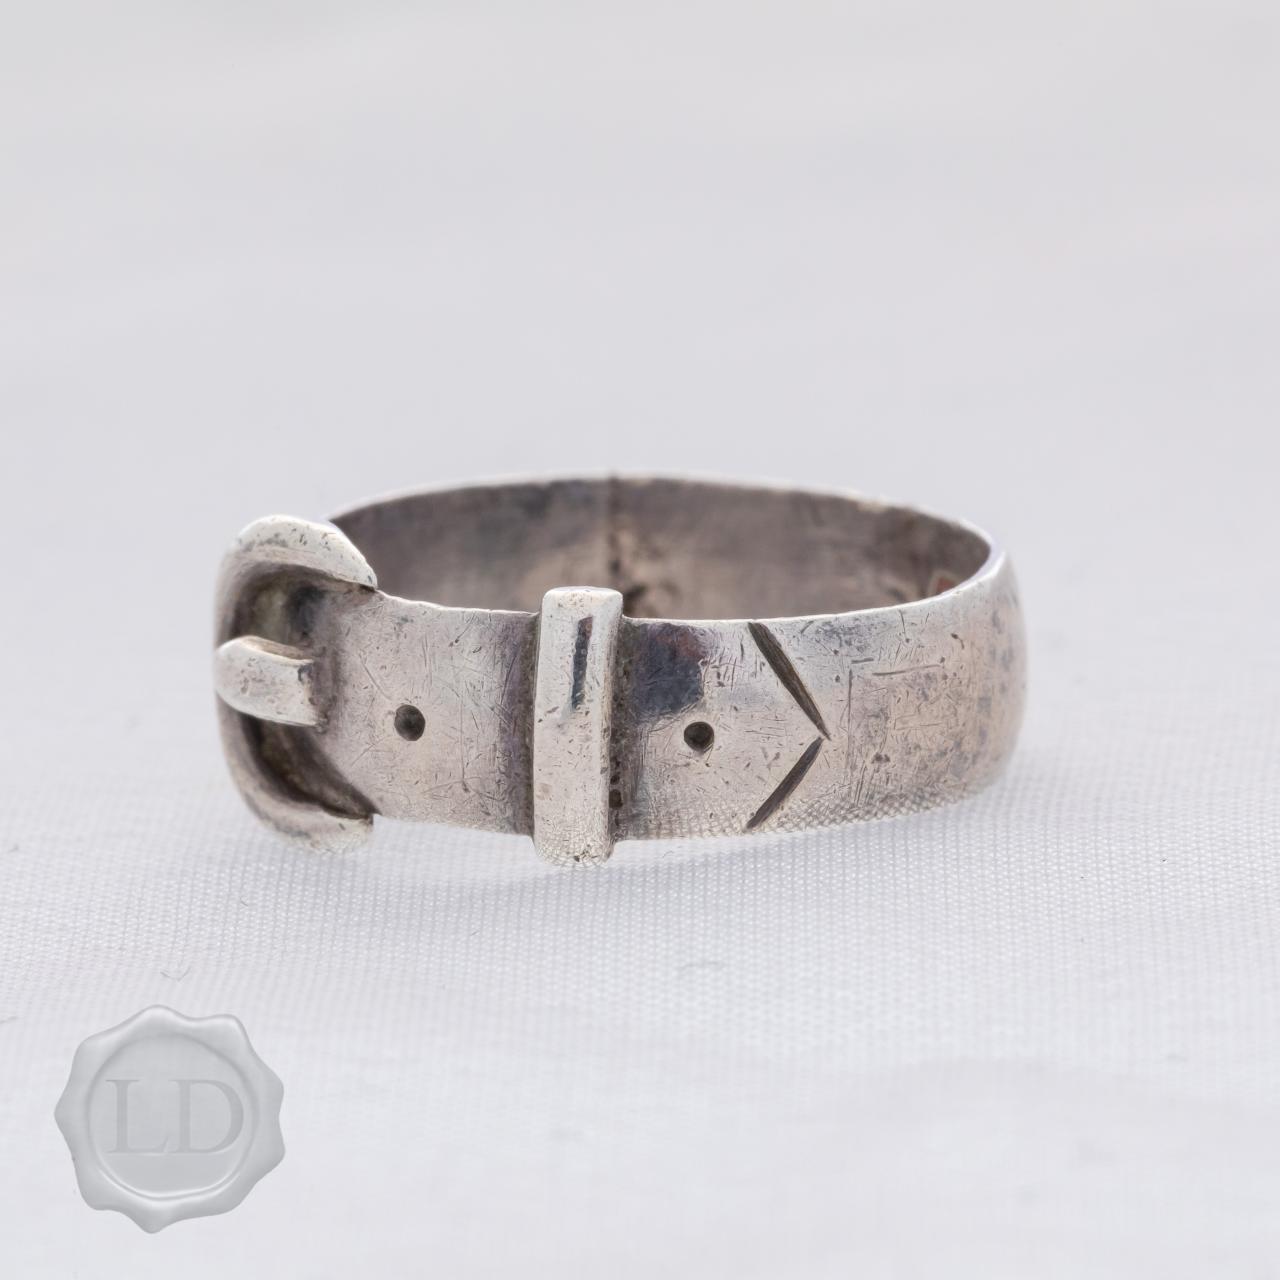 Antique buckle ring